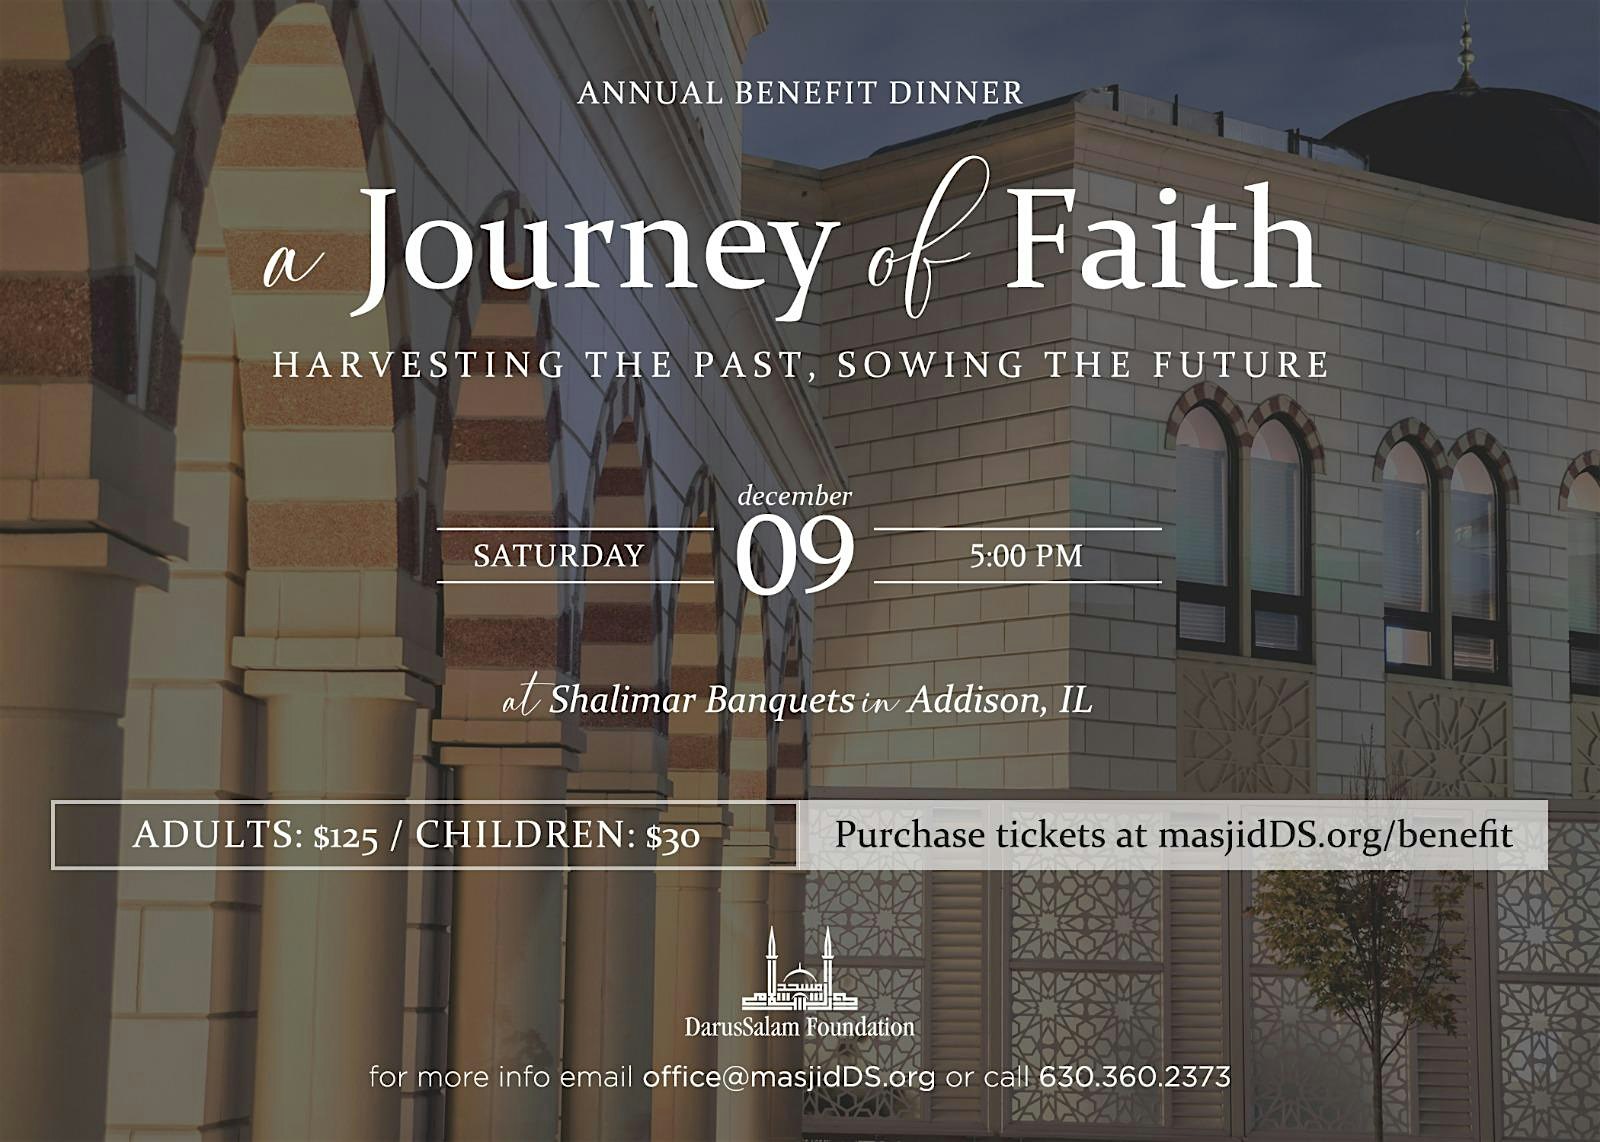 A Journey of Faith: Harvesting the Past, Sowing the Future